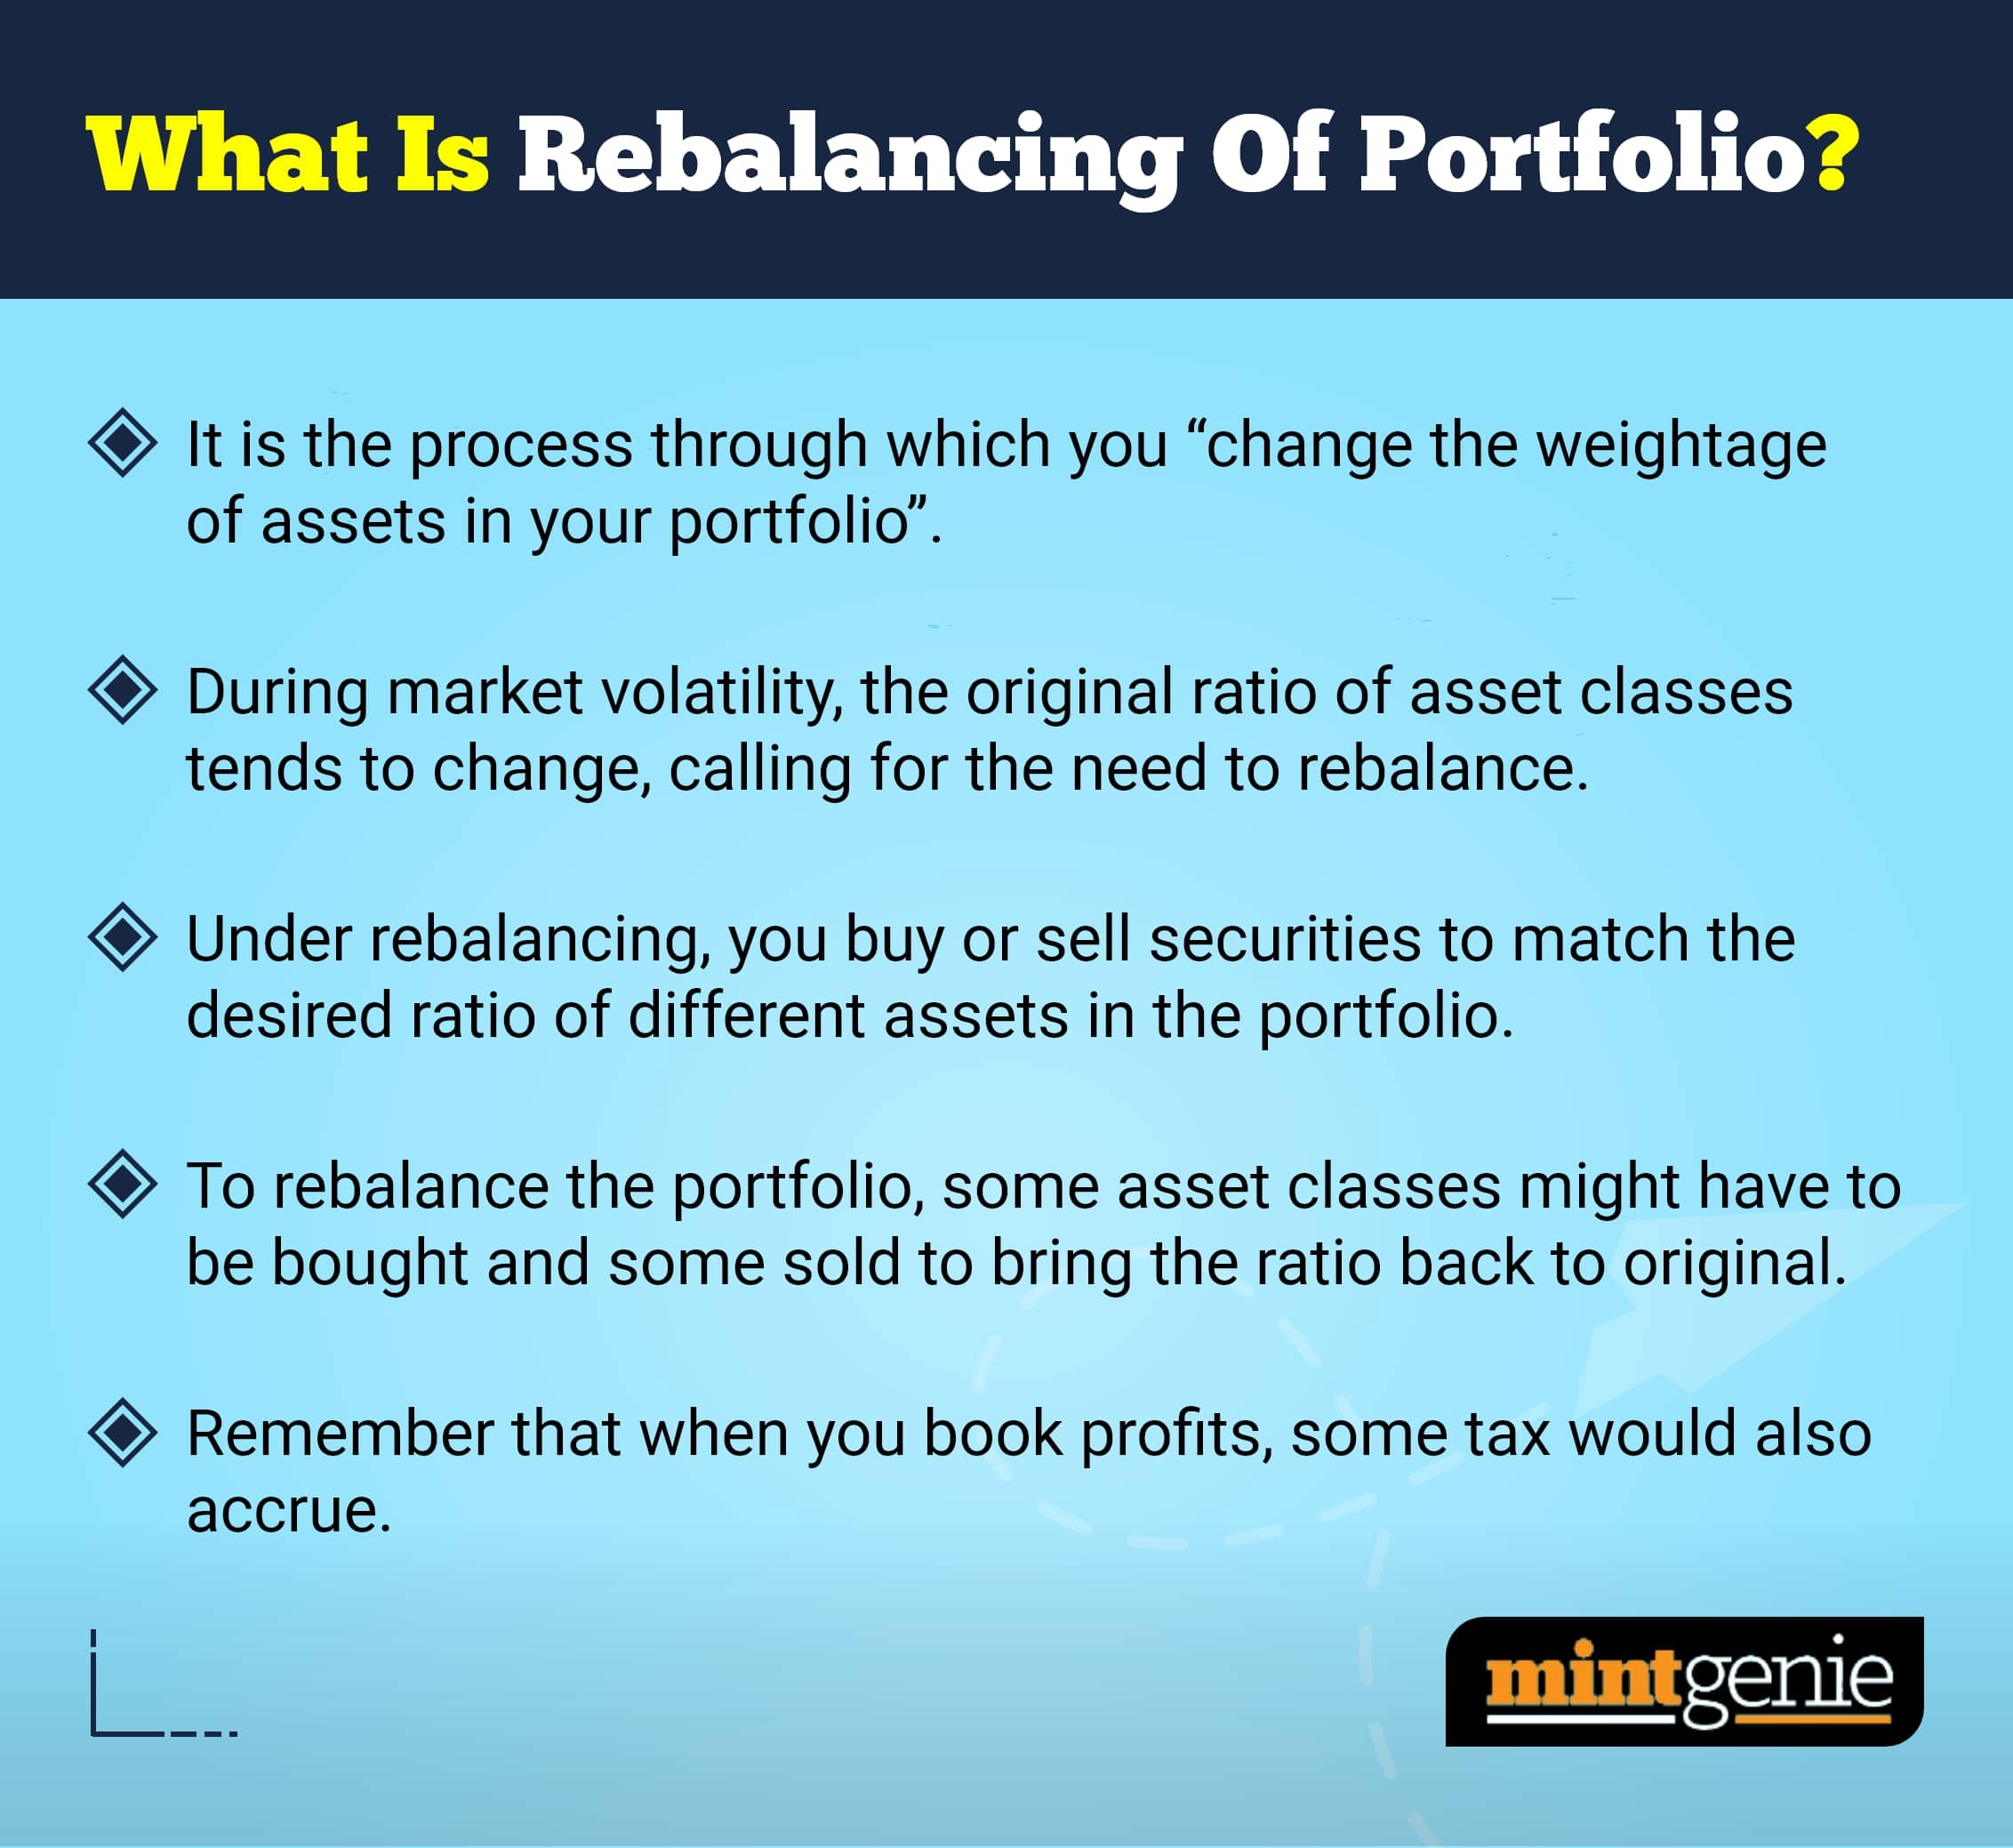 Rebalancing of a portfolio is the process through which you change the weightage of assets in your portfolio.&nbsp;